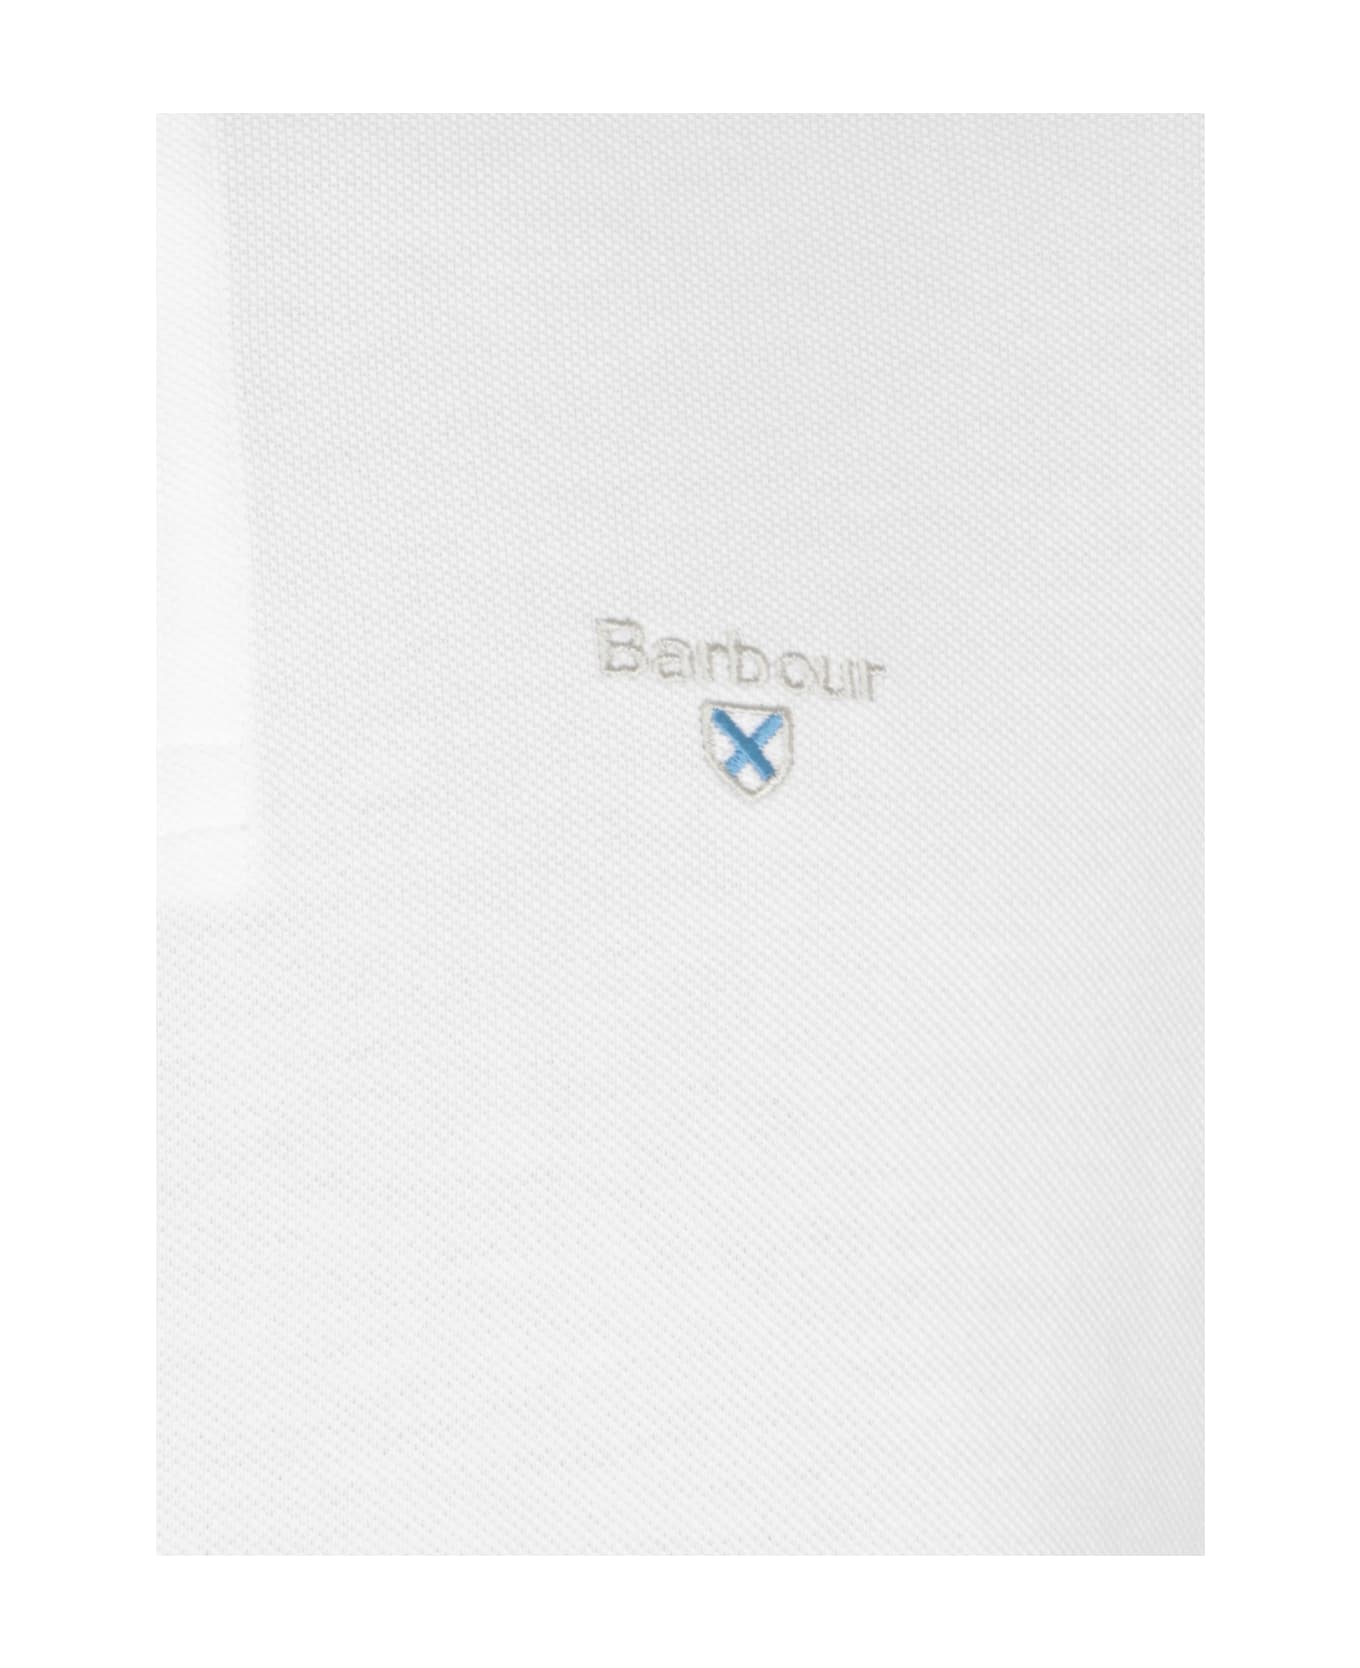 Barbour Logoed Polo Shirt - White